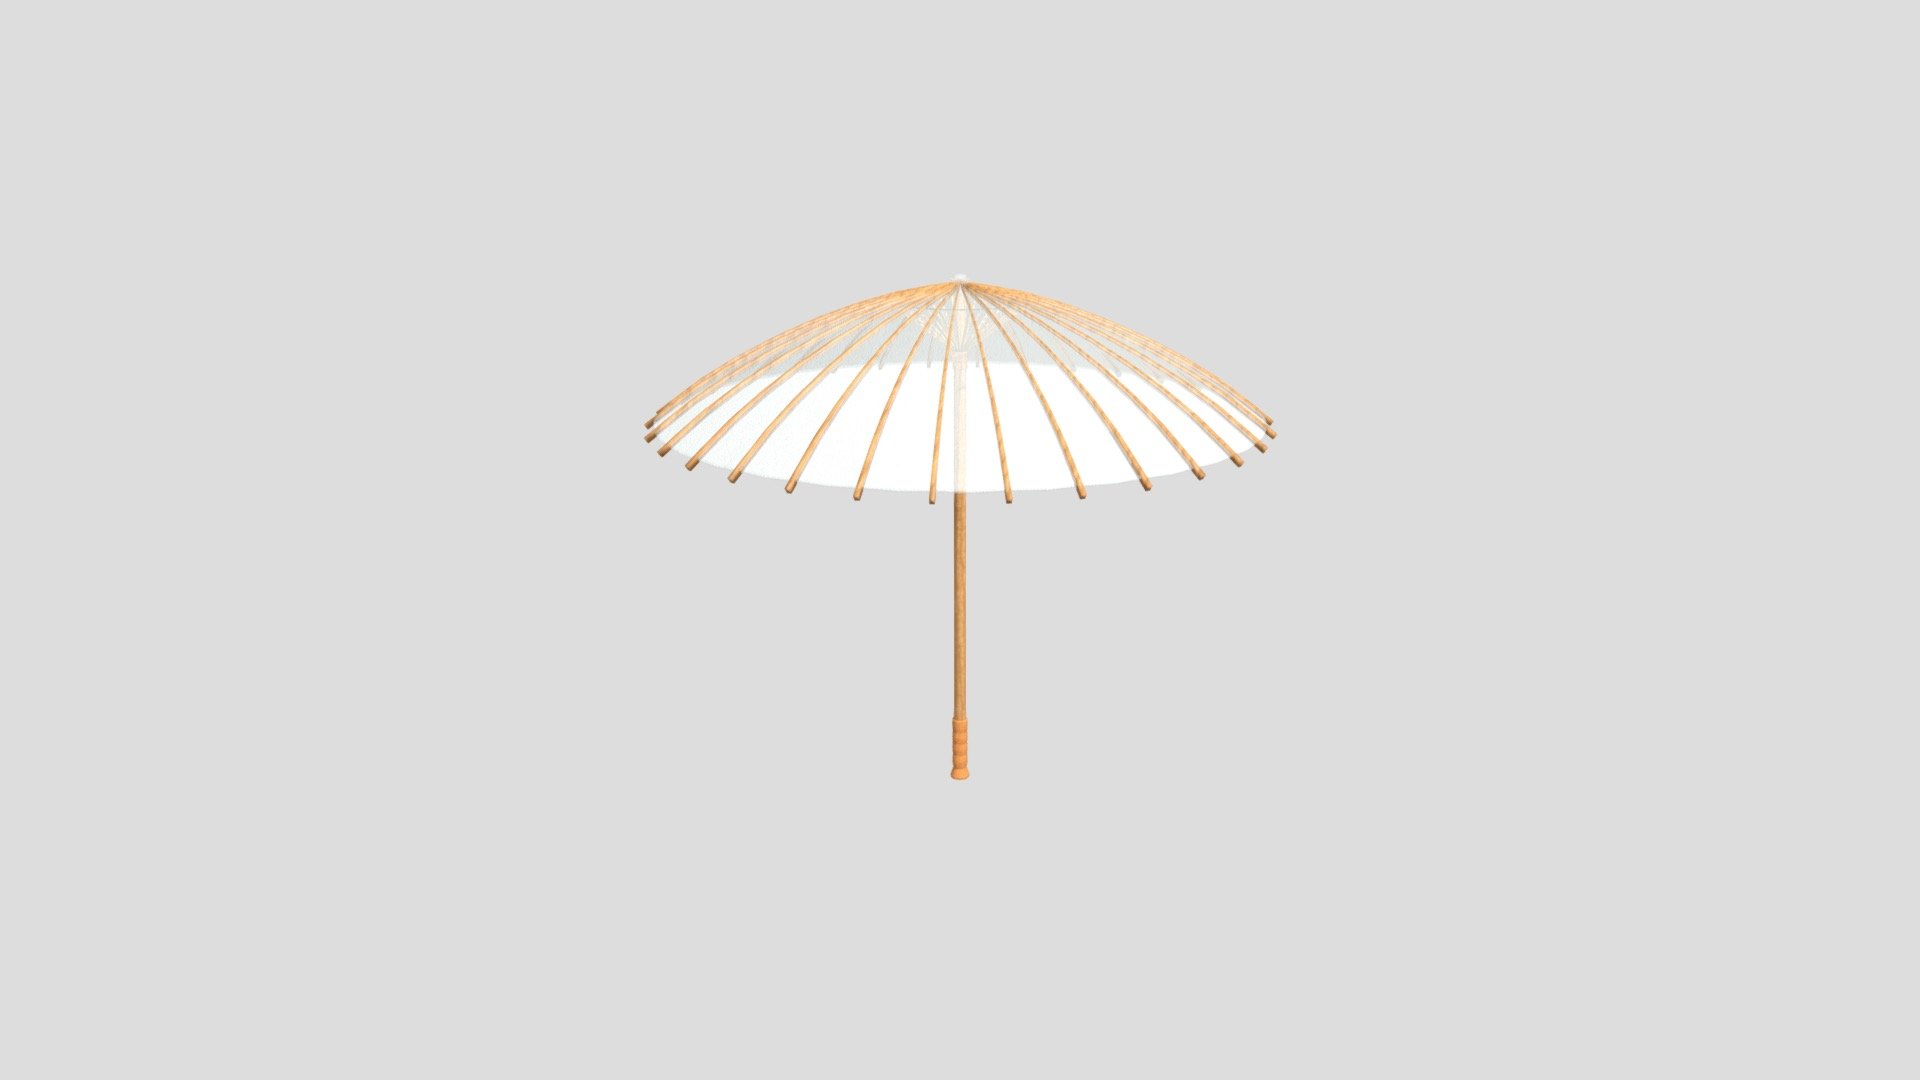 Textures: 2048 x 2048, Colors on texture: white, green, orange colors.

Has Normal Map: 2048 x 2048.

Materials: 2 - Parasol Umbrella, Wood.

Smooth shaded.

Mirrored.

Subdivision Level: 0

Origin located on handle-center.

Polygons: 12212

Vertices: 6402

Formats: Fbx, Obj, Stl, Dae.

I hope you enjoy the model! - Parasol Umbrella - Buy Royalty Free 3D model by Ed+ (@EDplus) 3d model